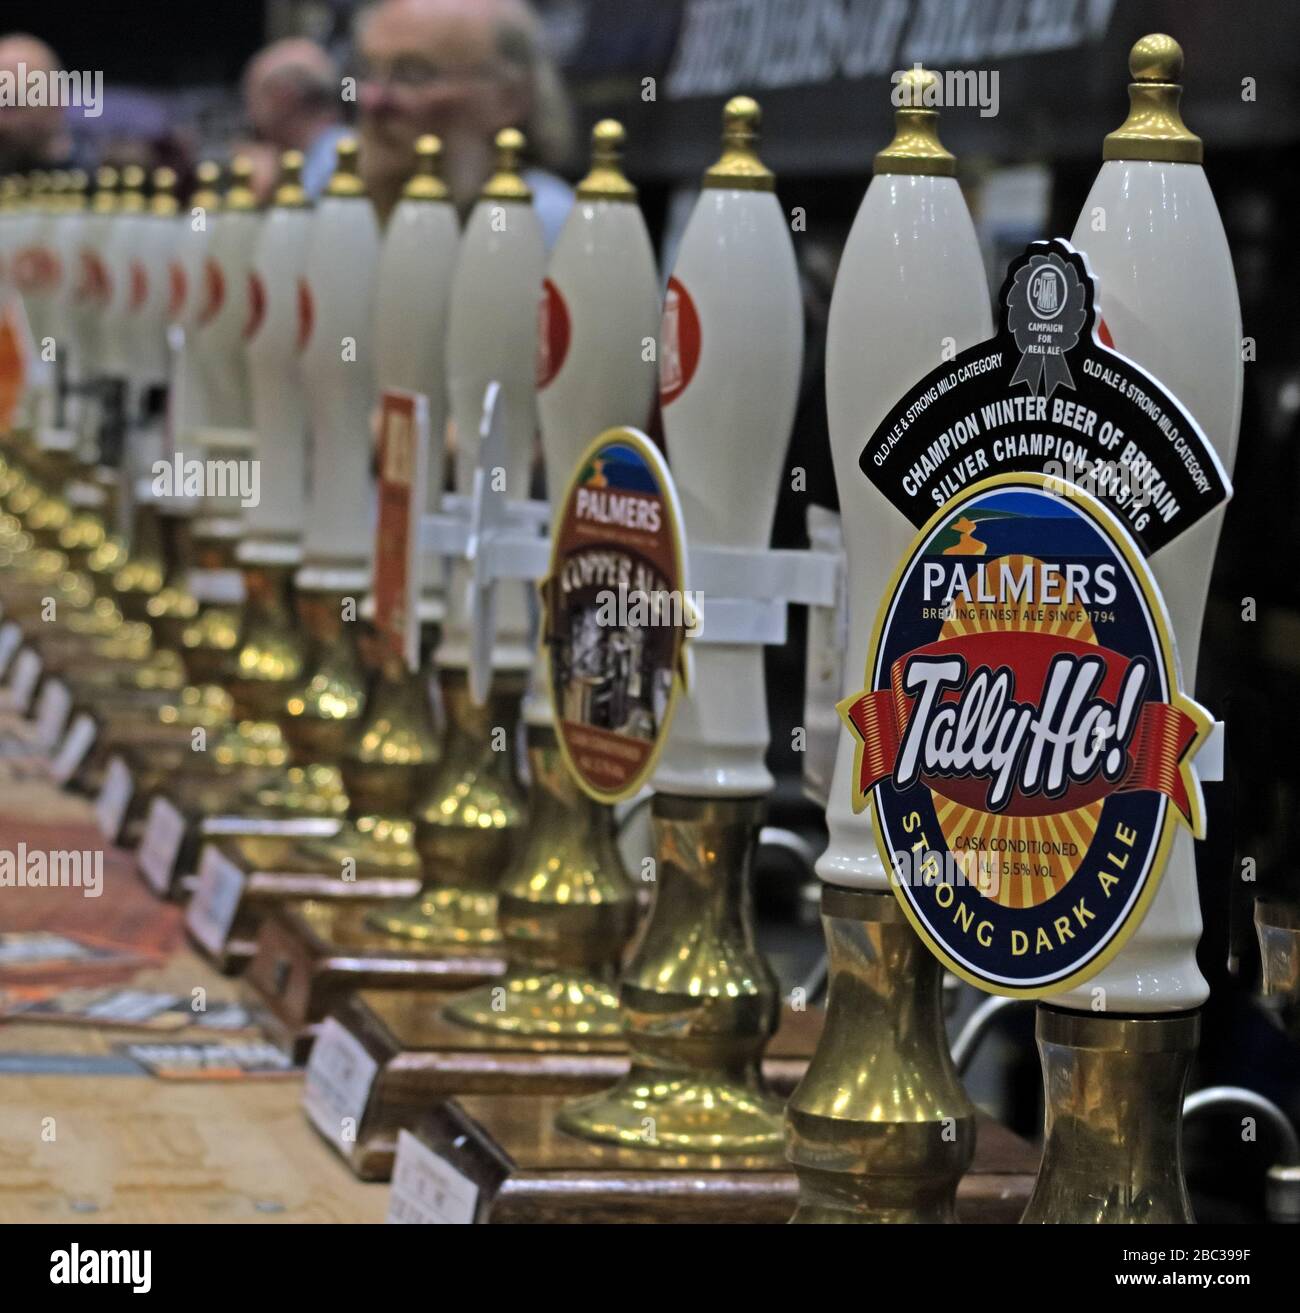 Tally Ho, Strong Dark Ale, Champion Winter Beer of Britain, beim Manchester Beer Festival, Manchester Central 2017 Stockfoto